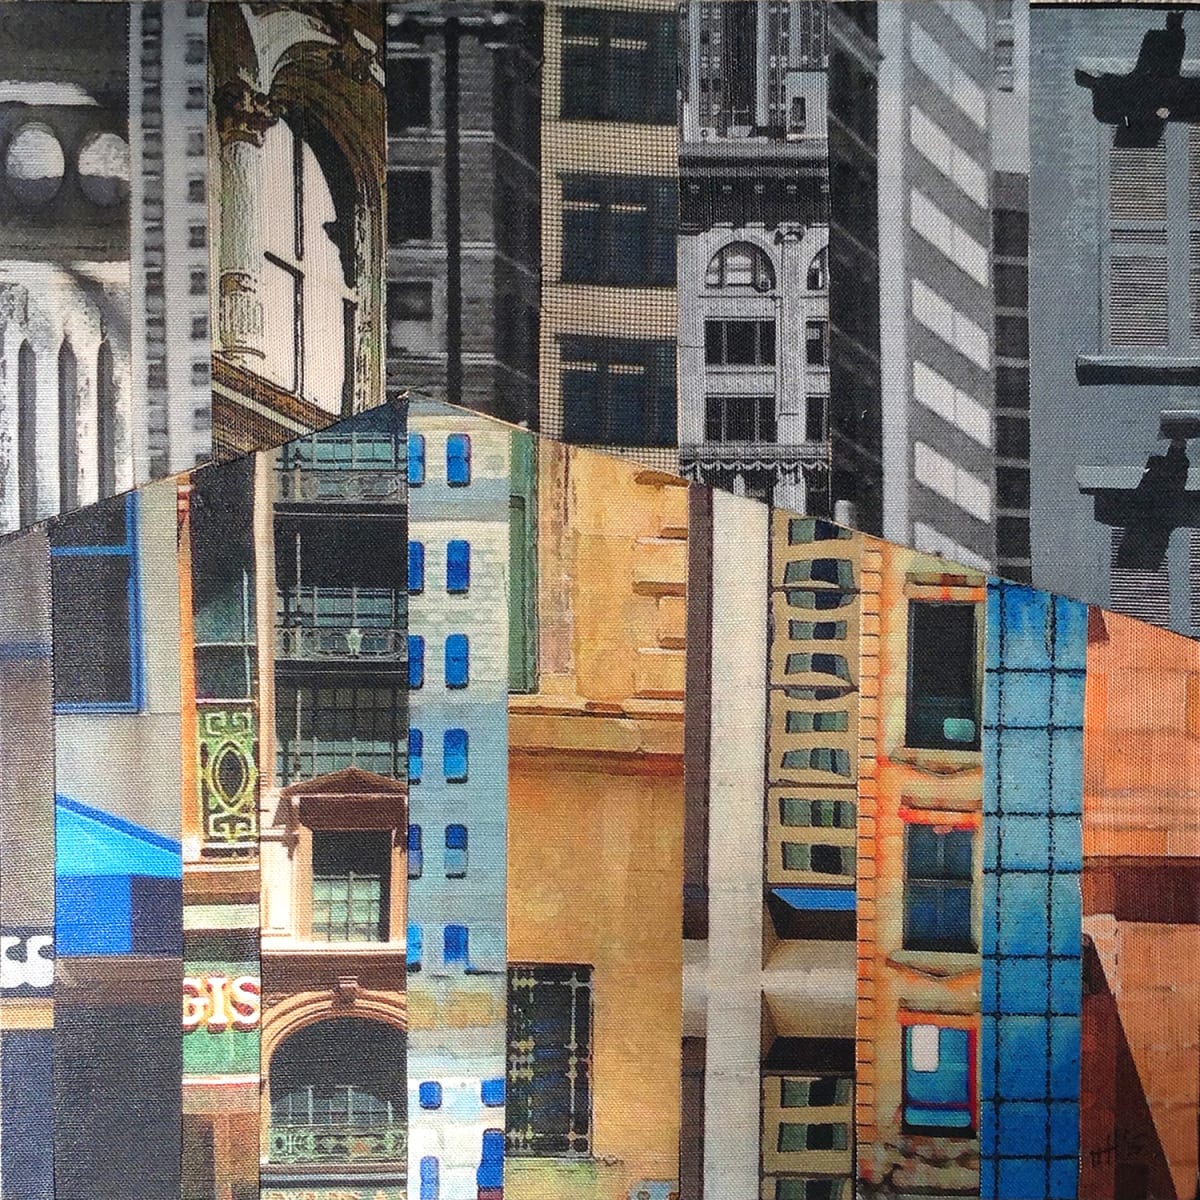 Patchwork City 15 by Marilyn Henrion  Image: Patchwork City 1q5